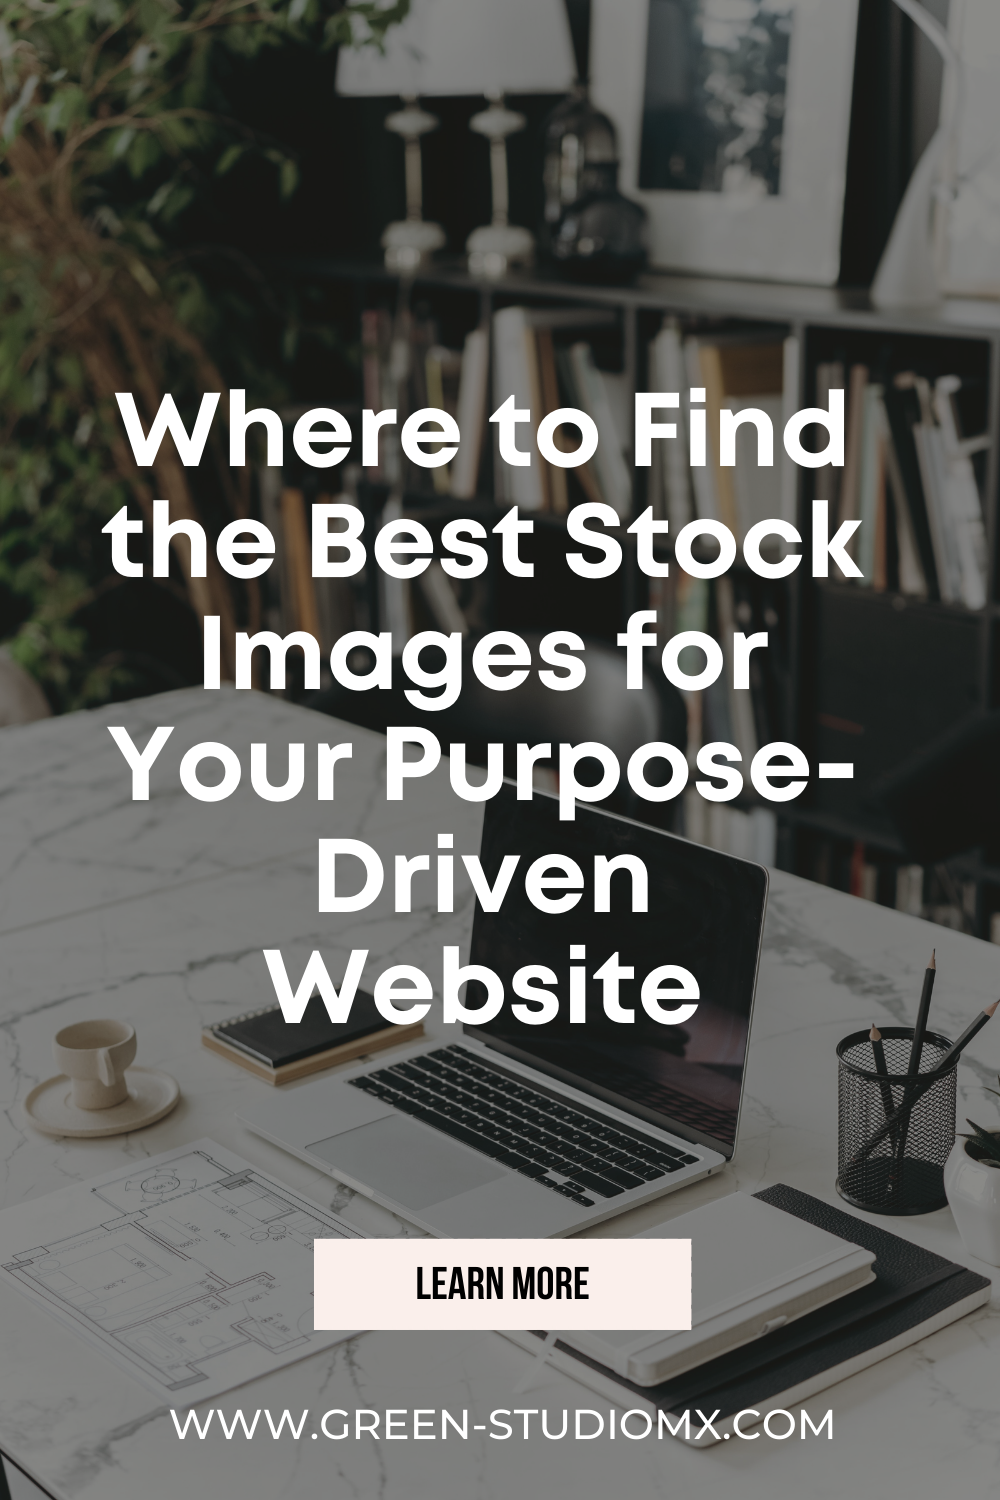 Where to Find the Best Stock Images